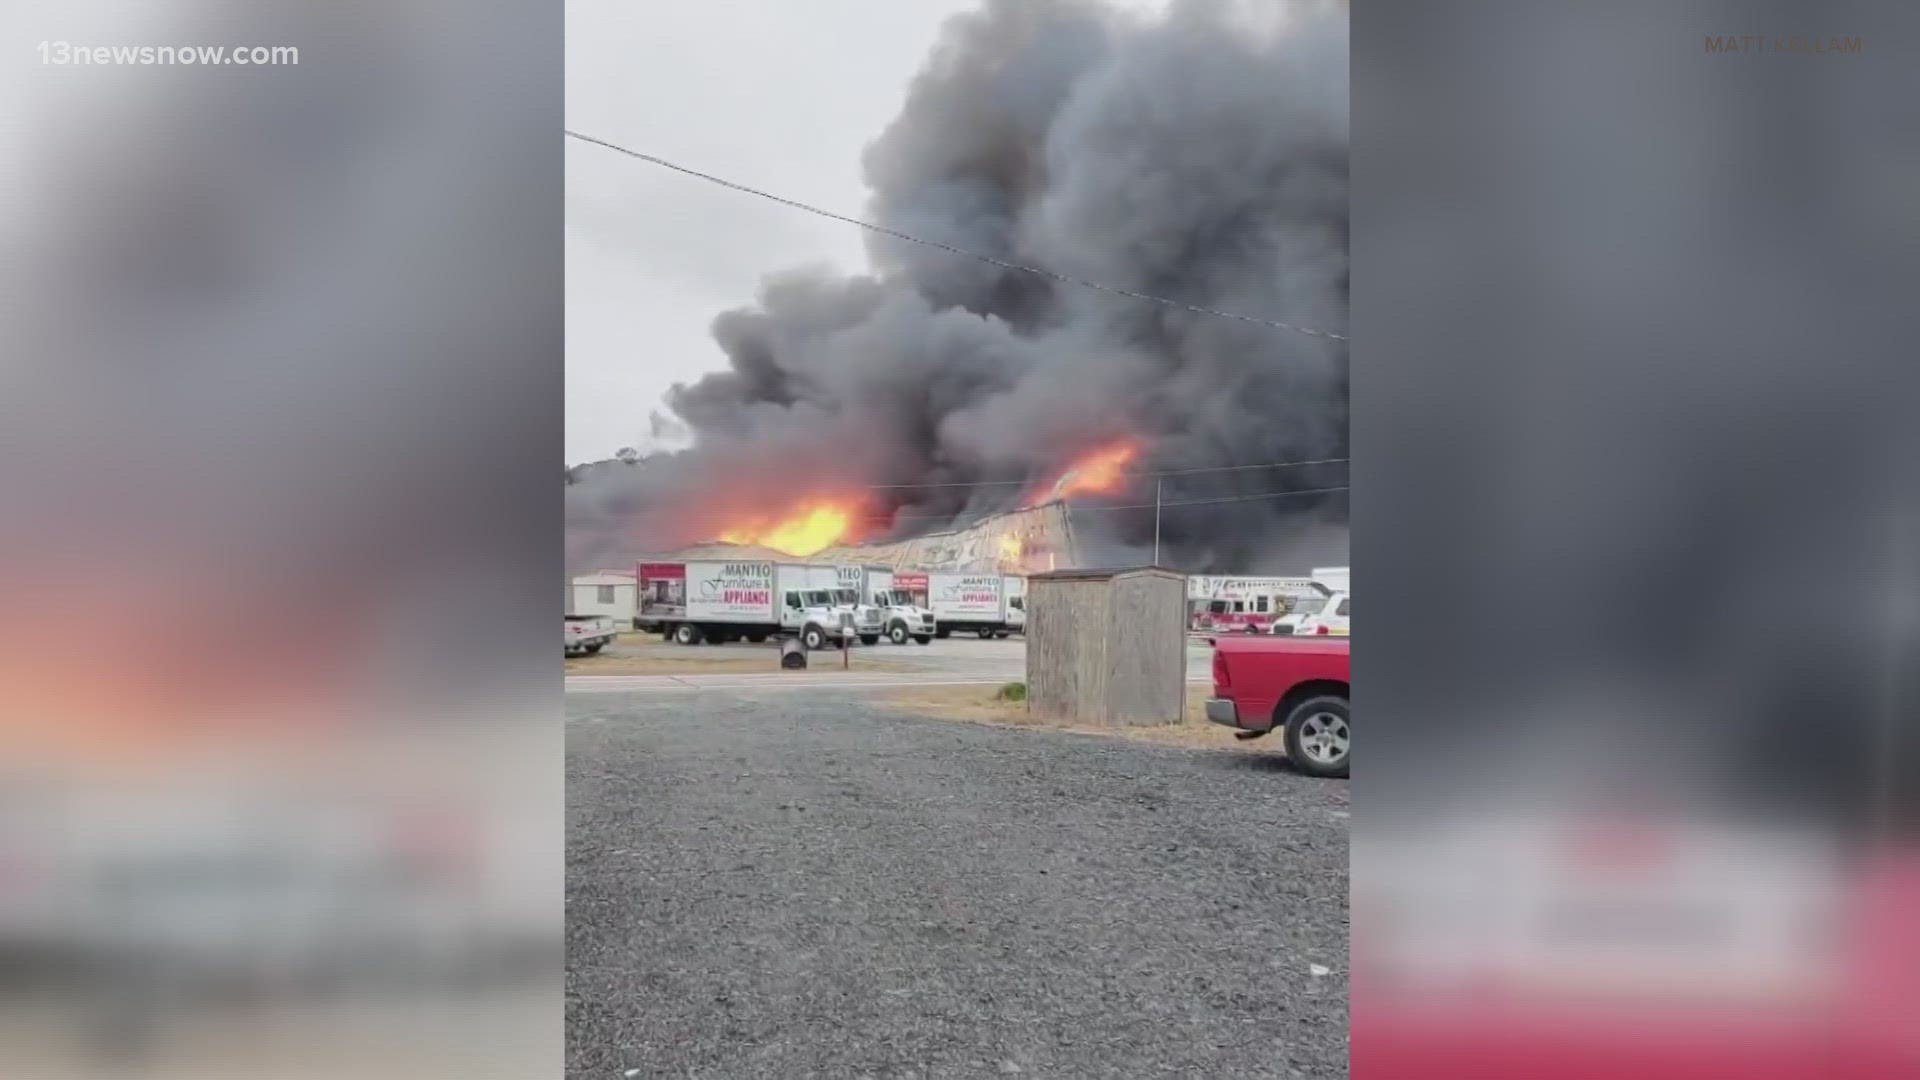 . Fire officials say the Manteo Furniture and Appliance Warehouse in Manns Harbor caught fire around 3:30 this afternoon.